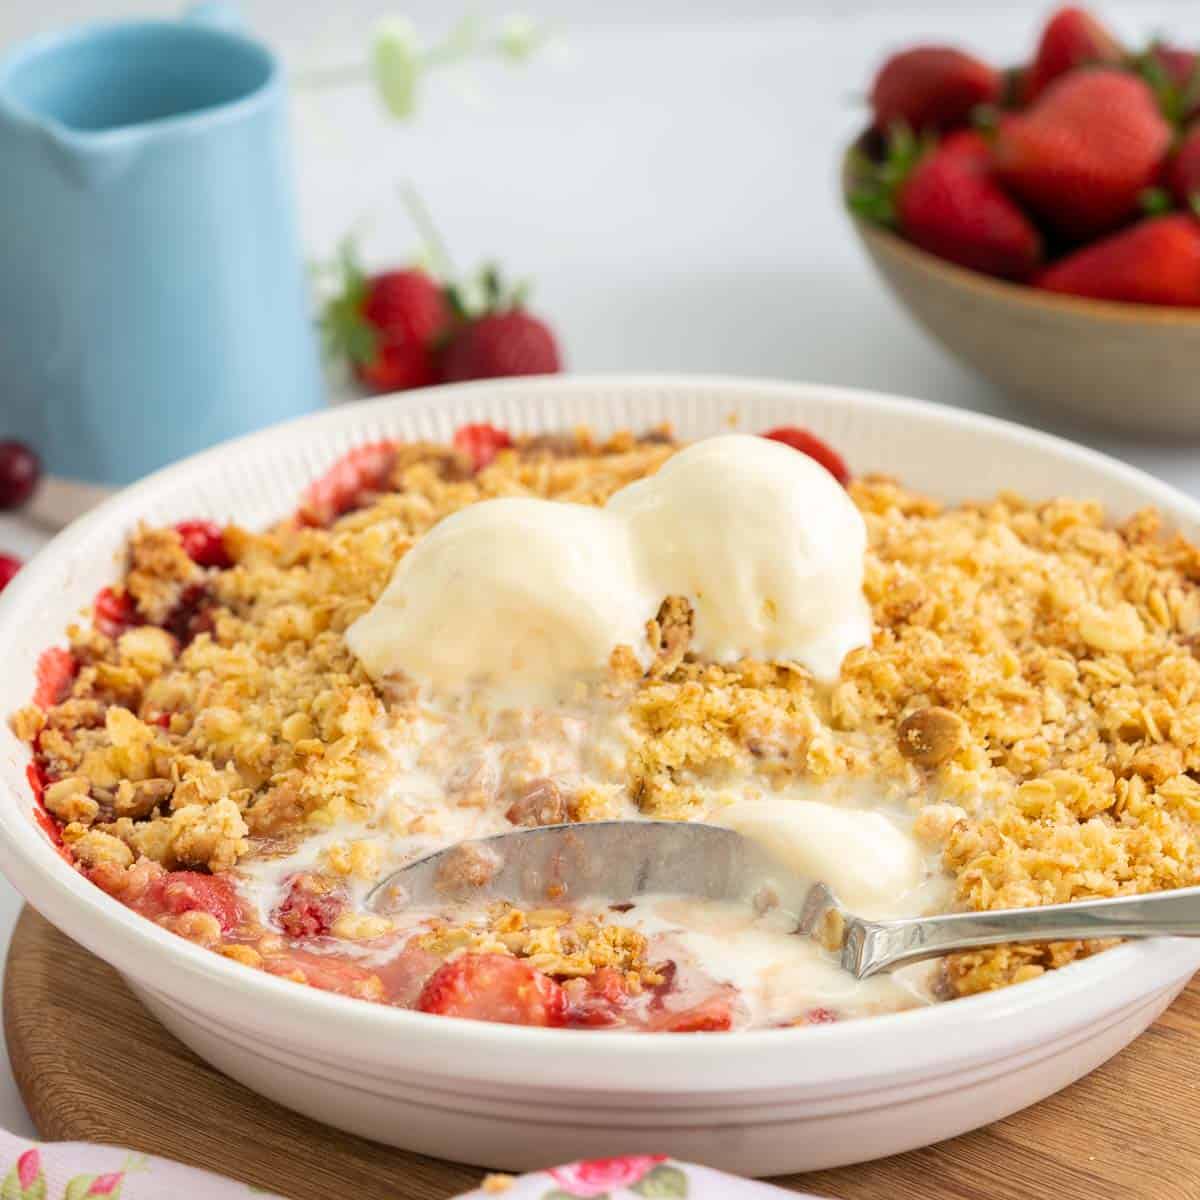 A large serving spoon dishing out strawberry crumble topped with icecream.